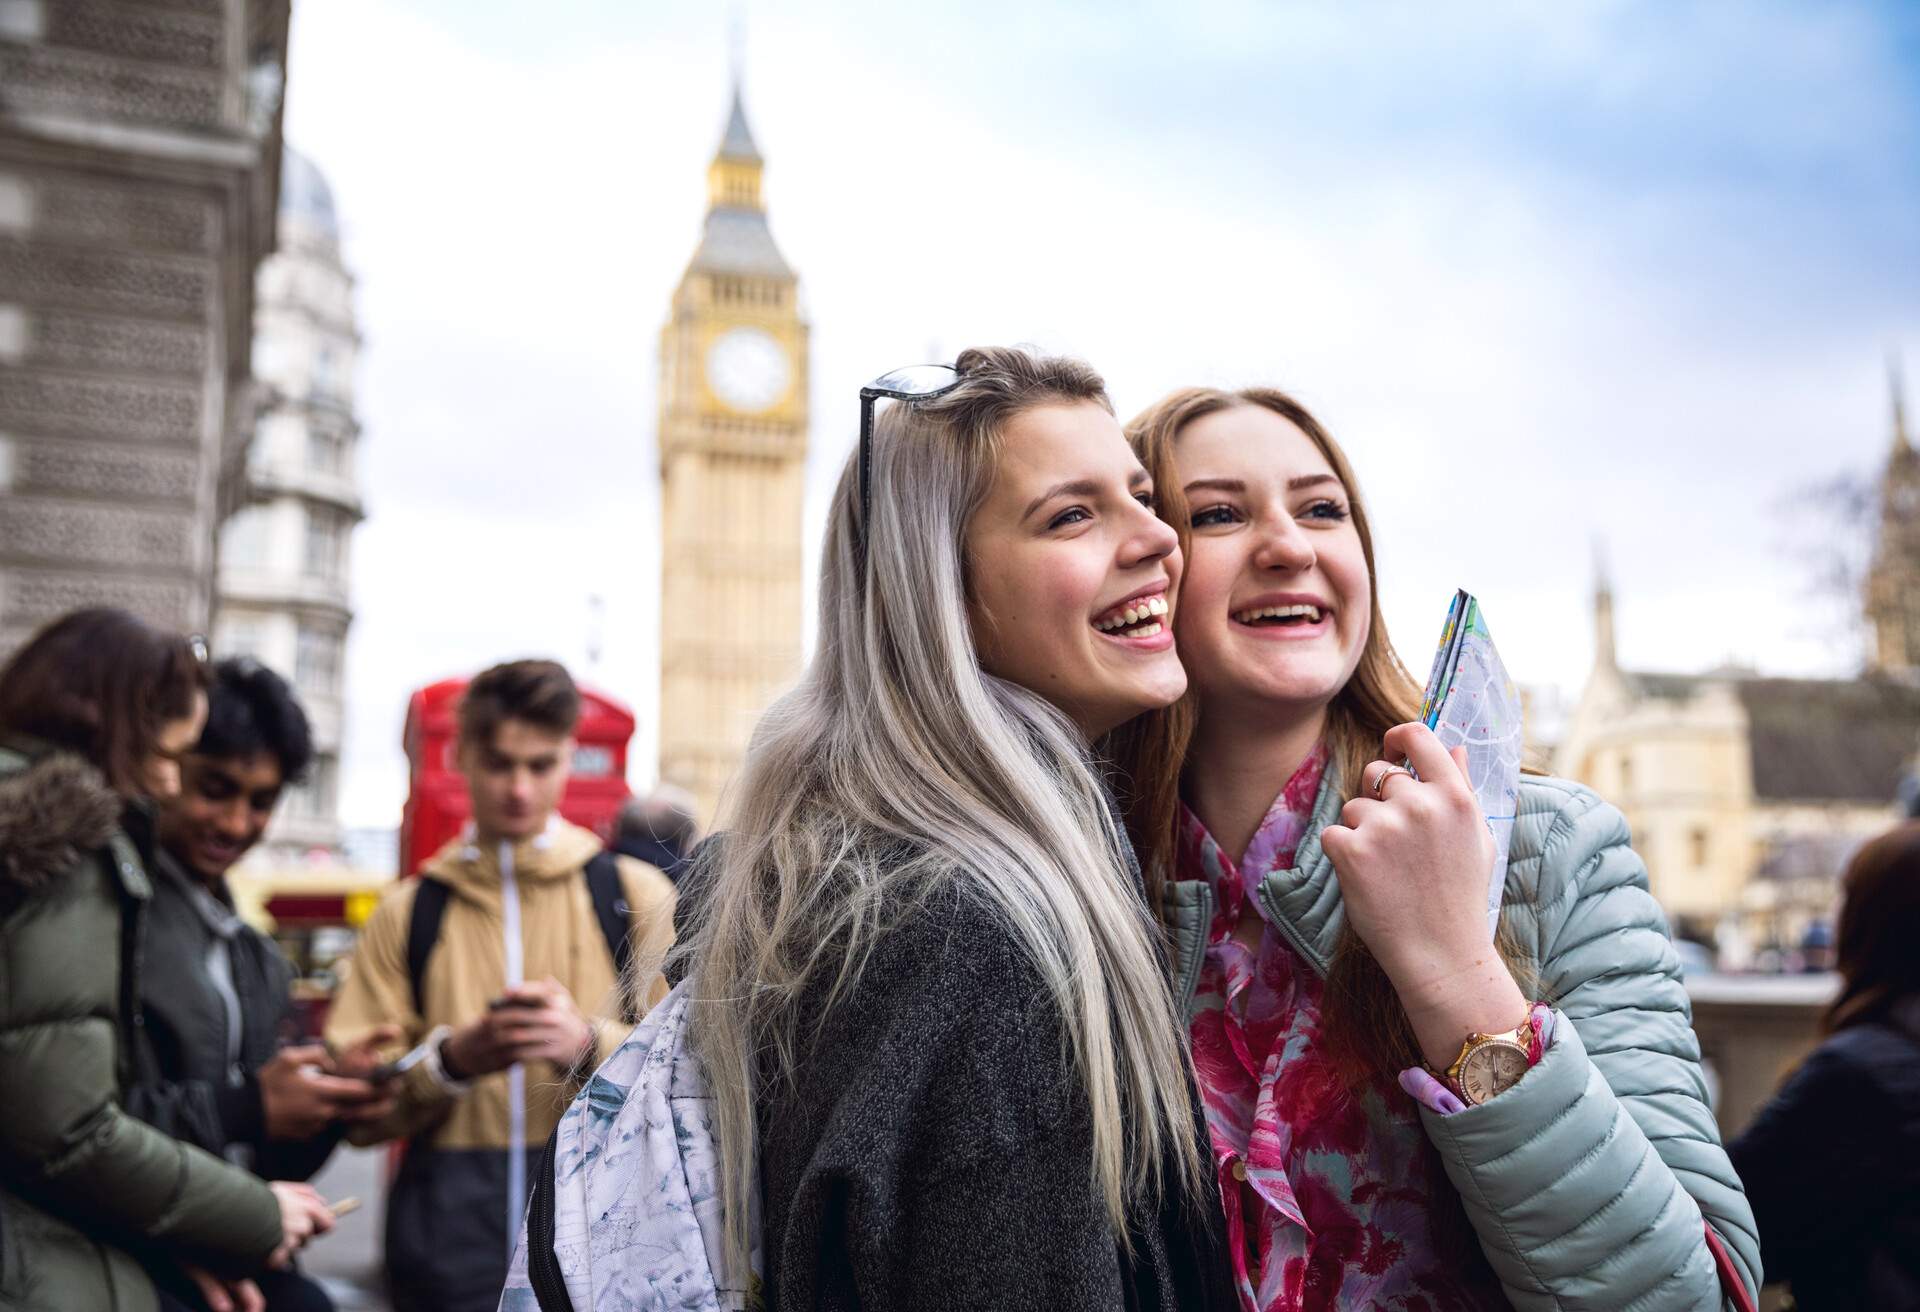 Group of young teenagers enjoying a school trip in London, visiting Westminster areas.